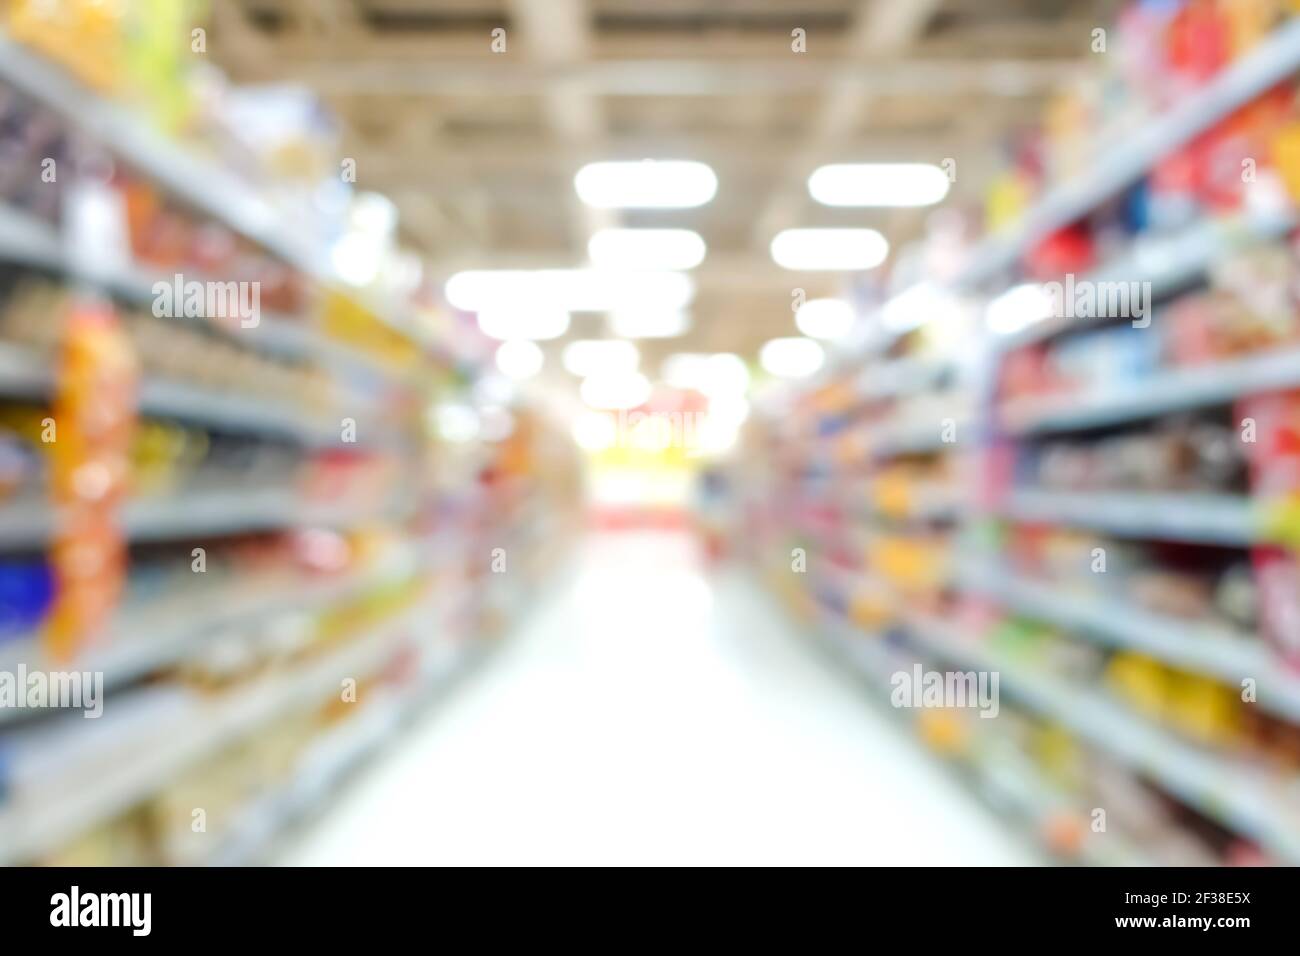 Blur image of aisle in supermarket, can be used as background Stock Photo